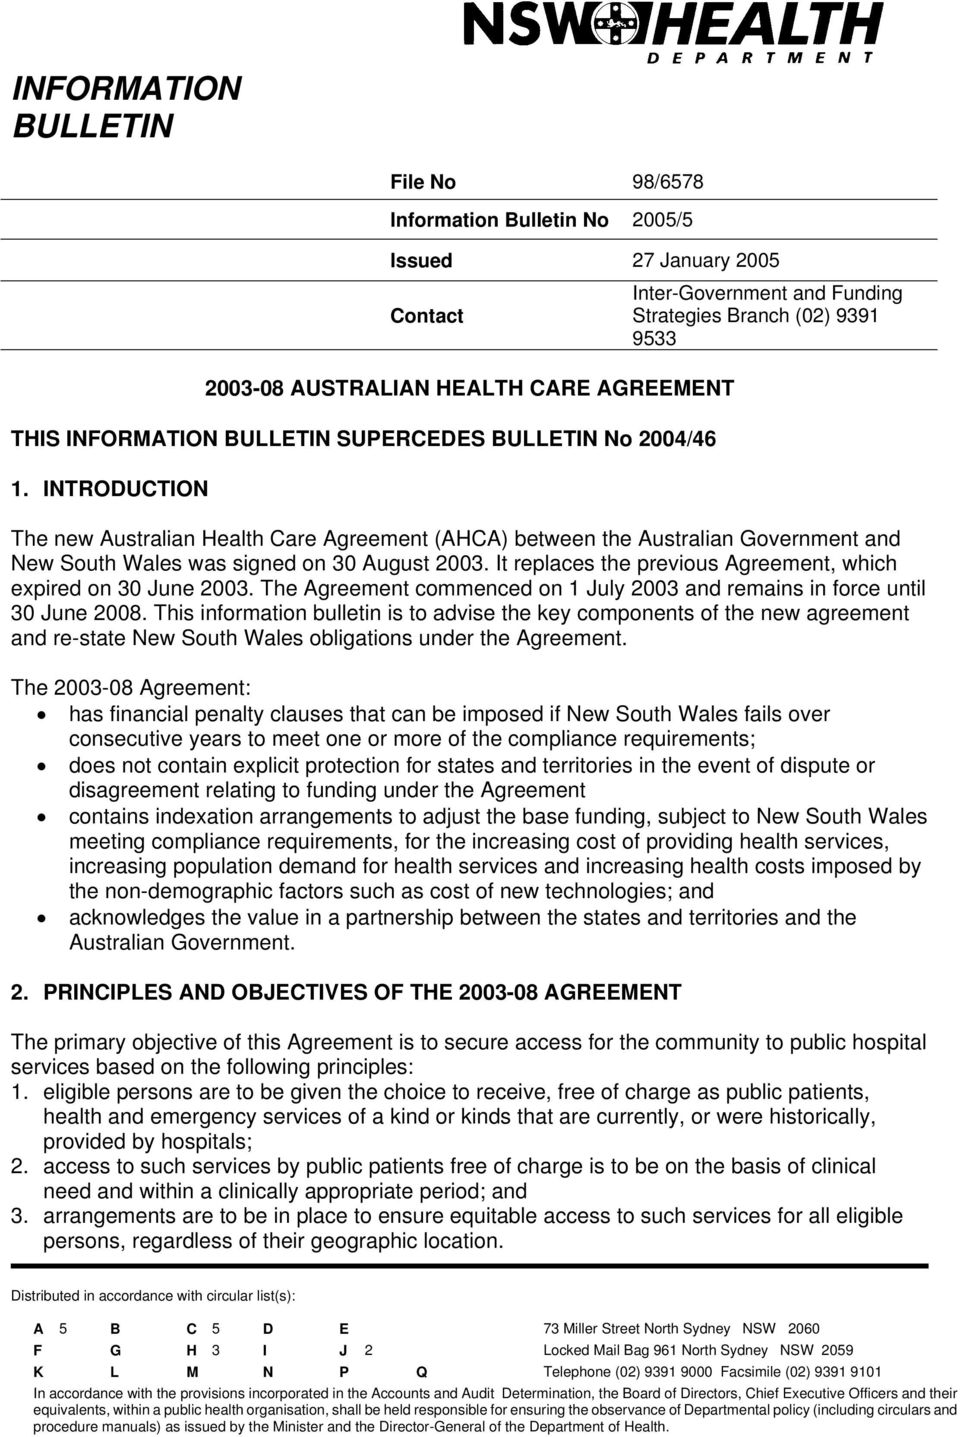 INTRODUCTION The new Australian Health Care Agreement (AHCA) between the Australian Government and New South Wales was signed on 30 August 2003.